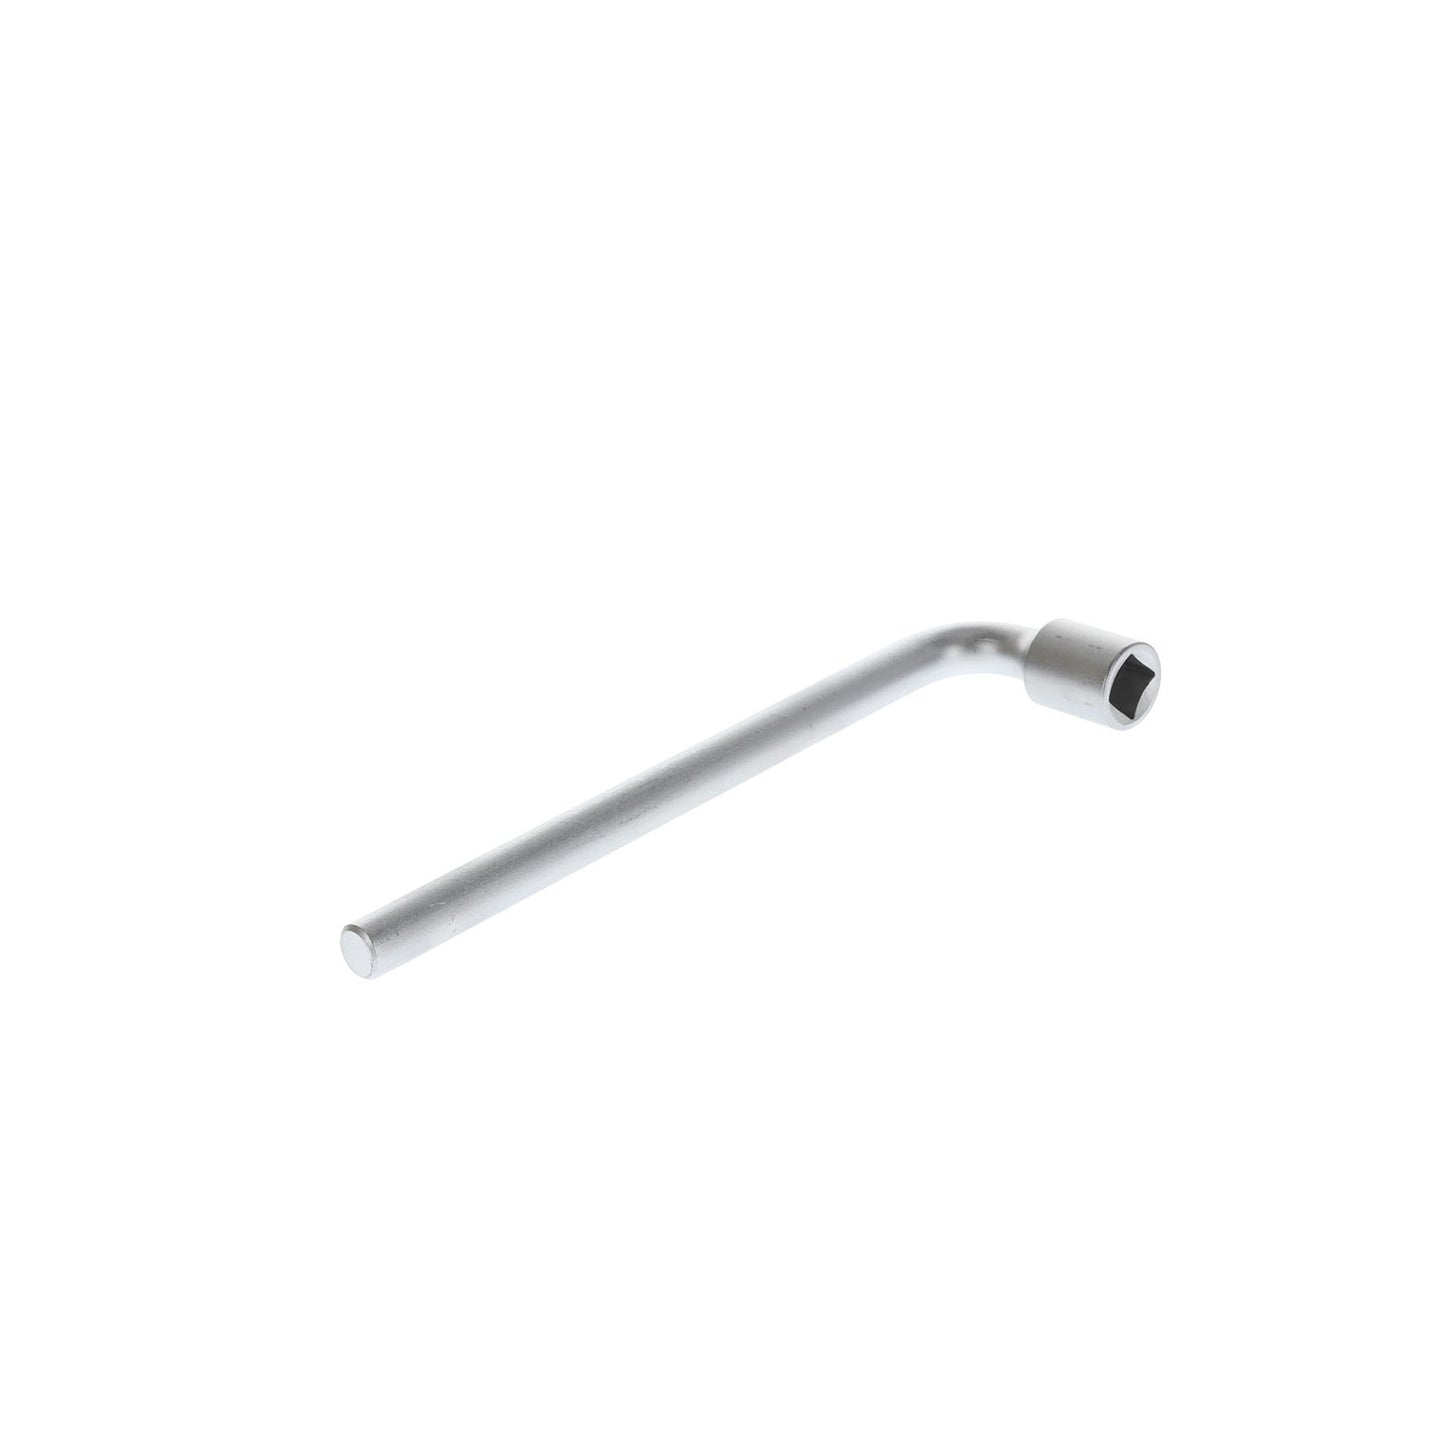 GEDORE 25 V 17 - Square Profile Wrench, 17mm (6195580)